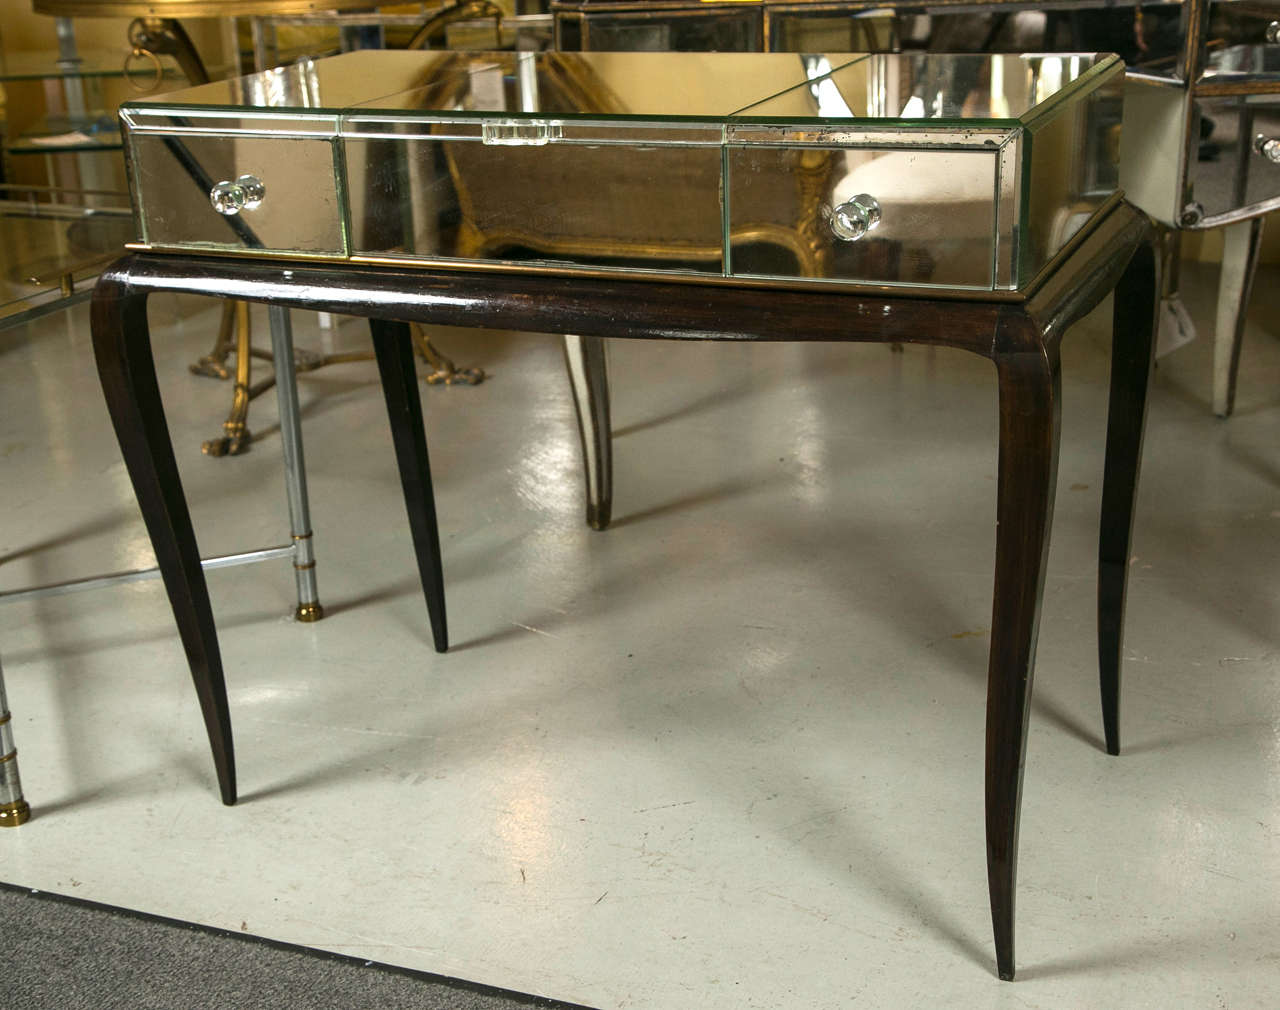 A fine Art Deco mirror and ebonized flip-top ladies desk on curved wooden legs. This vintage mirrored desk top is supported by curved legs which hold a bevelled mirror glass flip-top vanity flanked by side drawers.
Top measurements: 32.75 width by